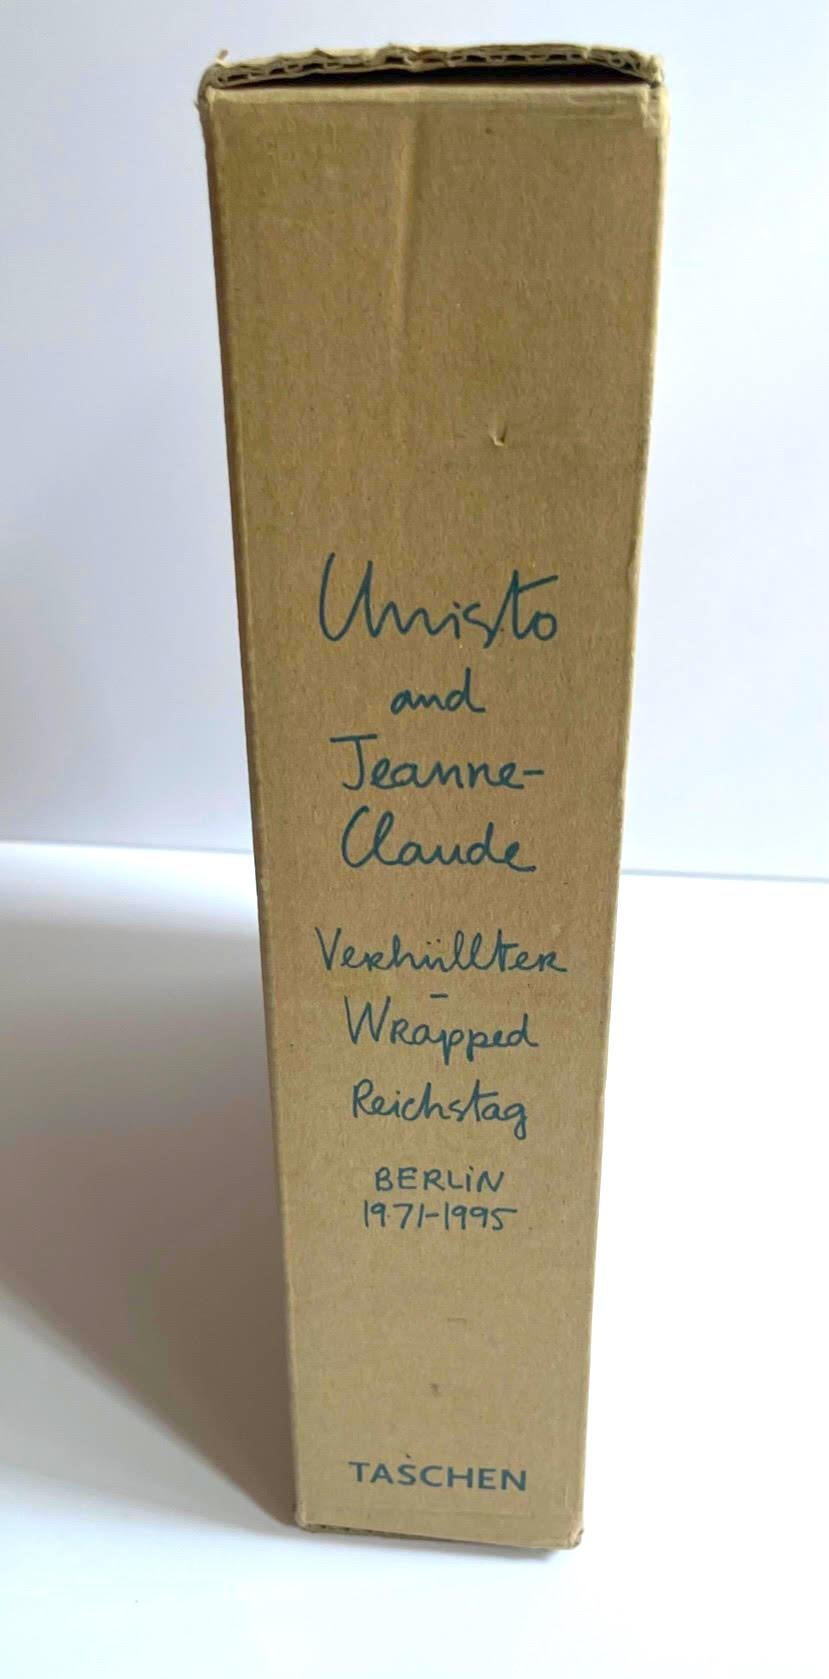 Christo and Jeanne-Claude: Wrapped Reichstag monograph & slipcase, LT Ed Signed For Sale 3